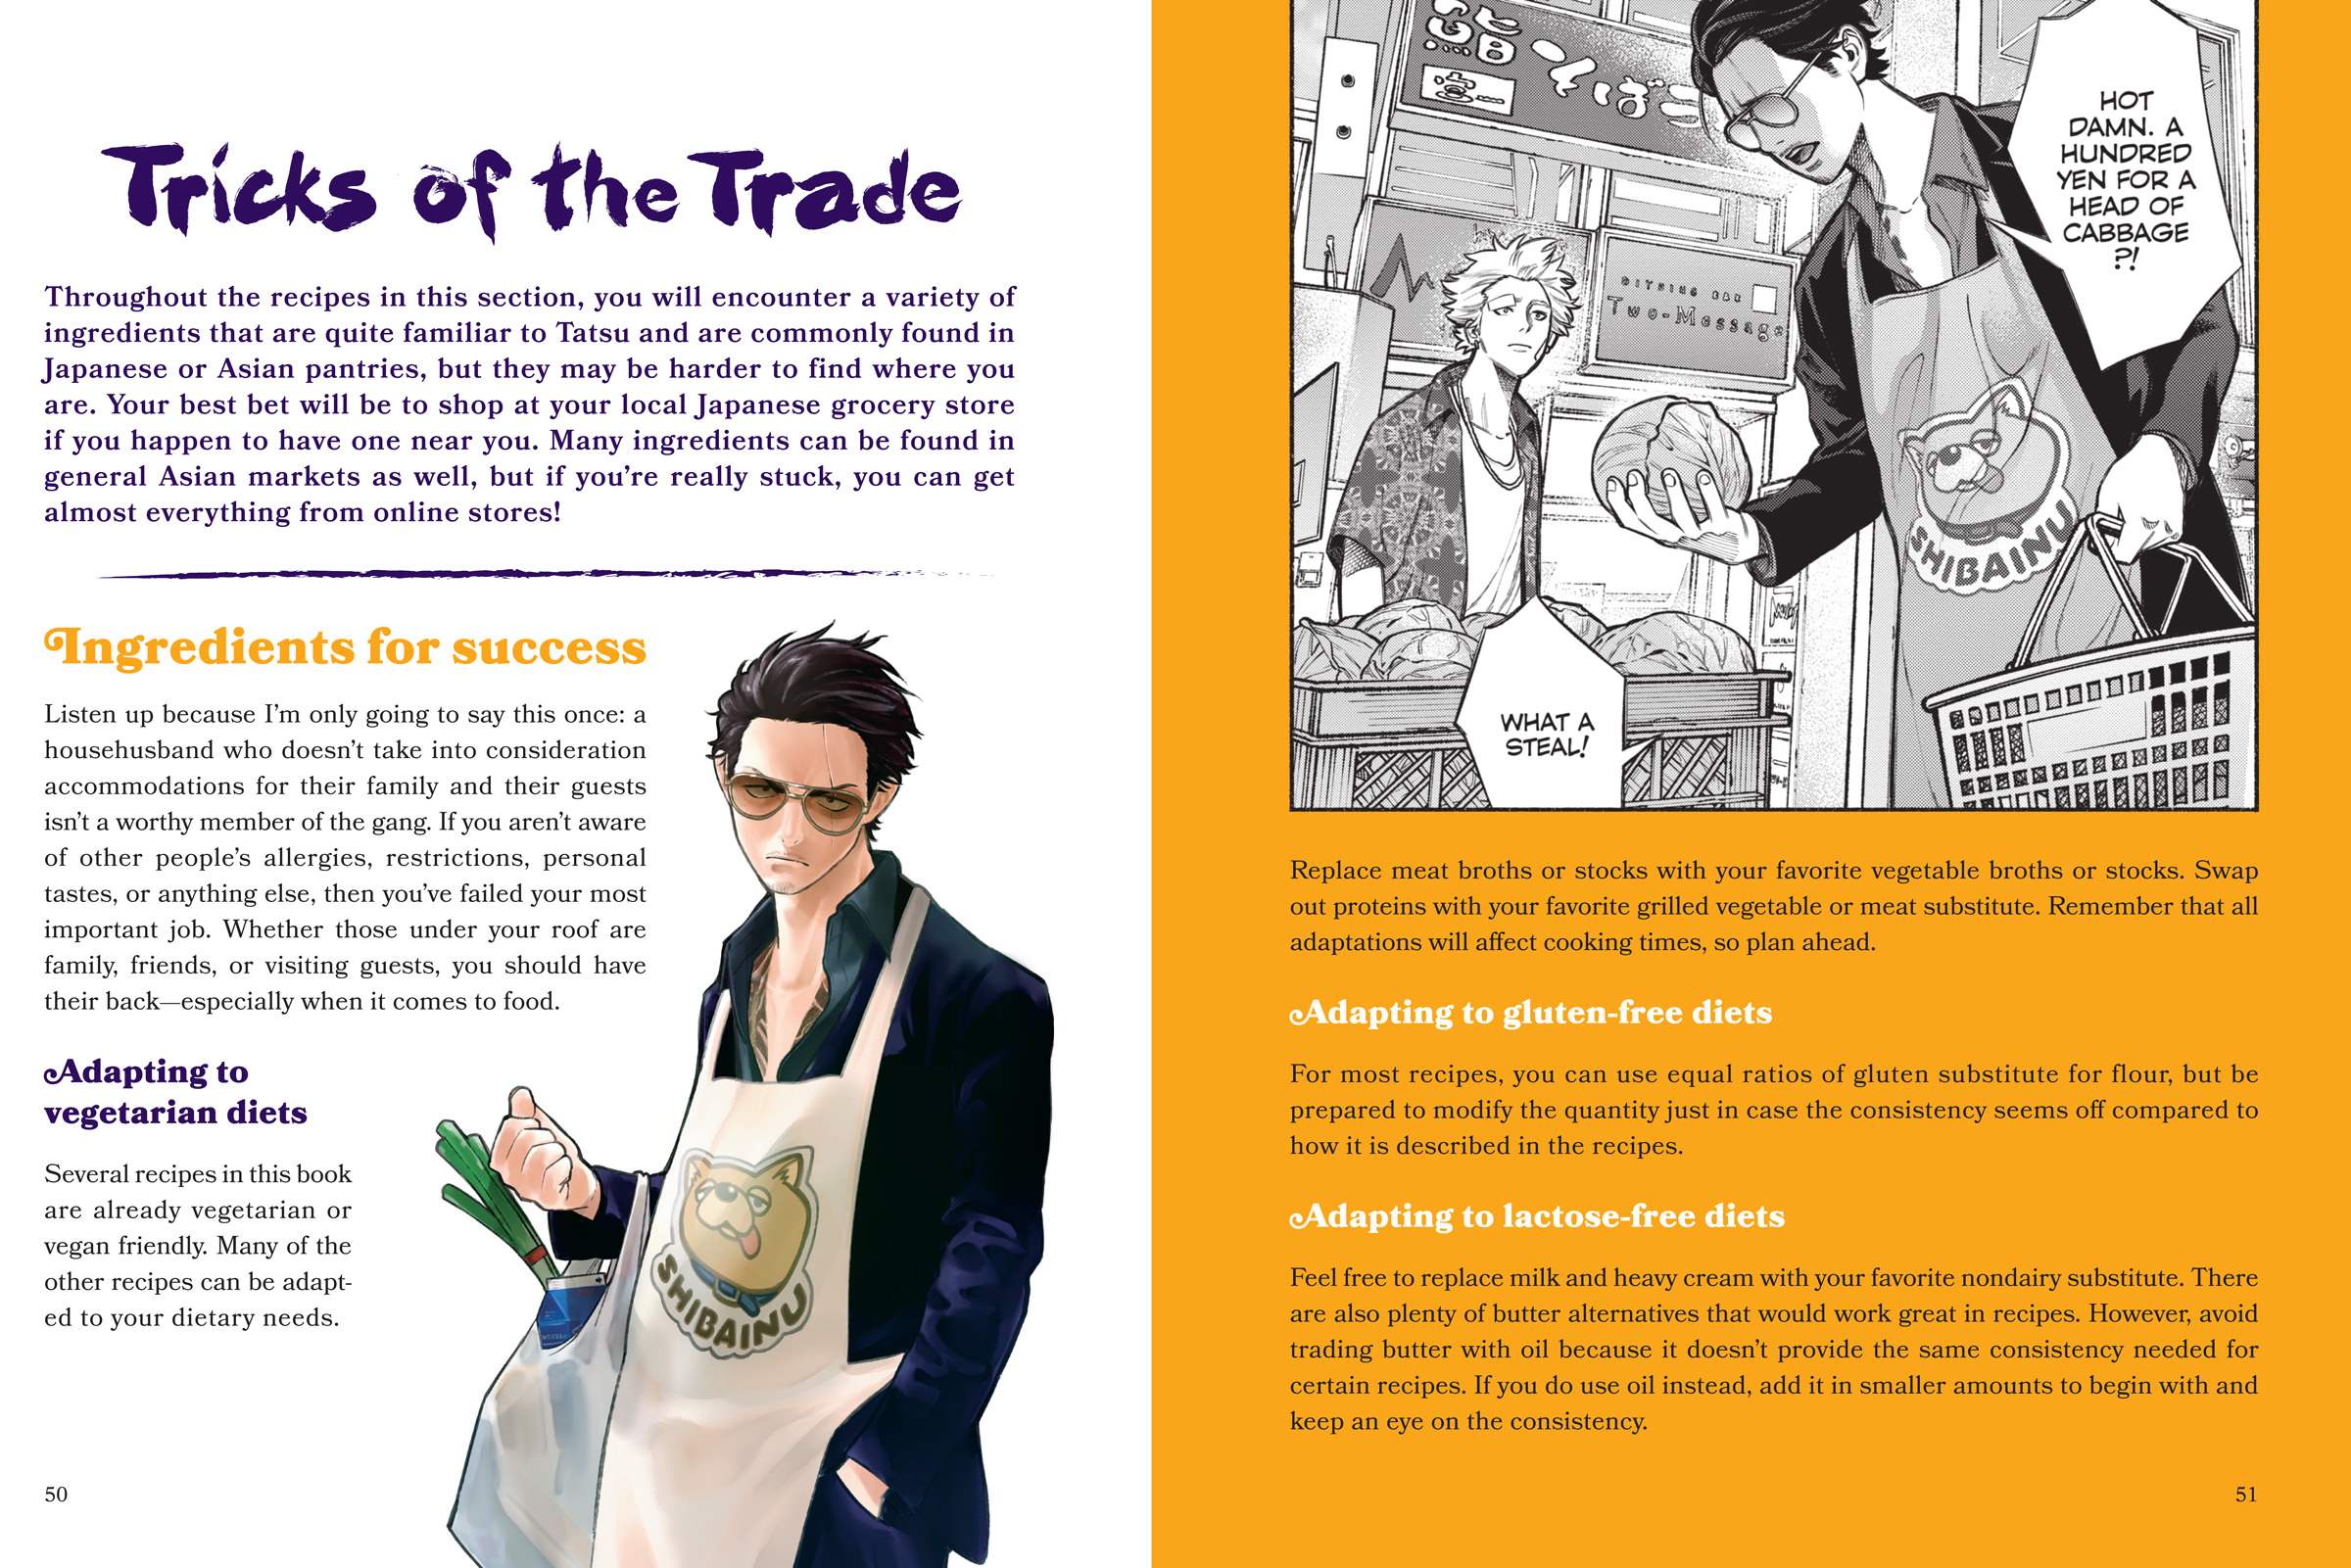 'The Way of the Househusband: The Gangster’s Guide to Housekeeping' Cookbook. Photo provided by VIZ Media